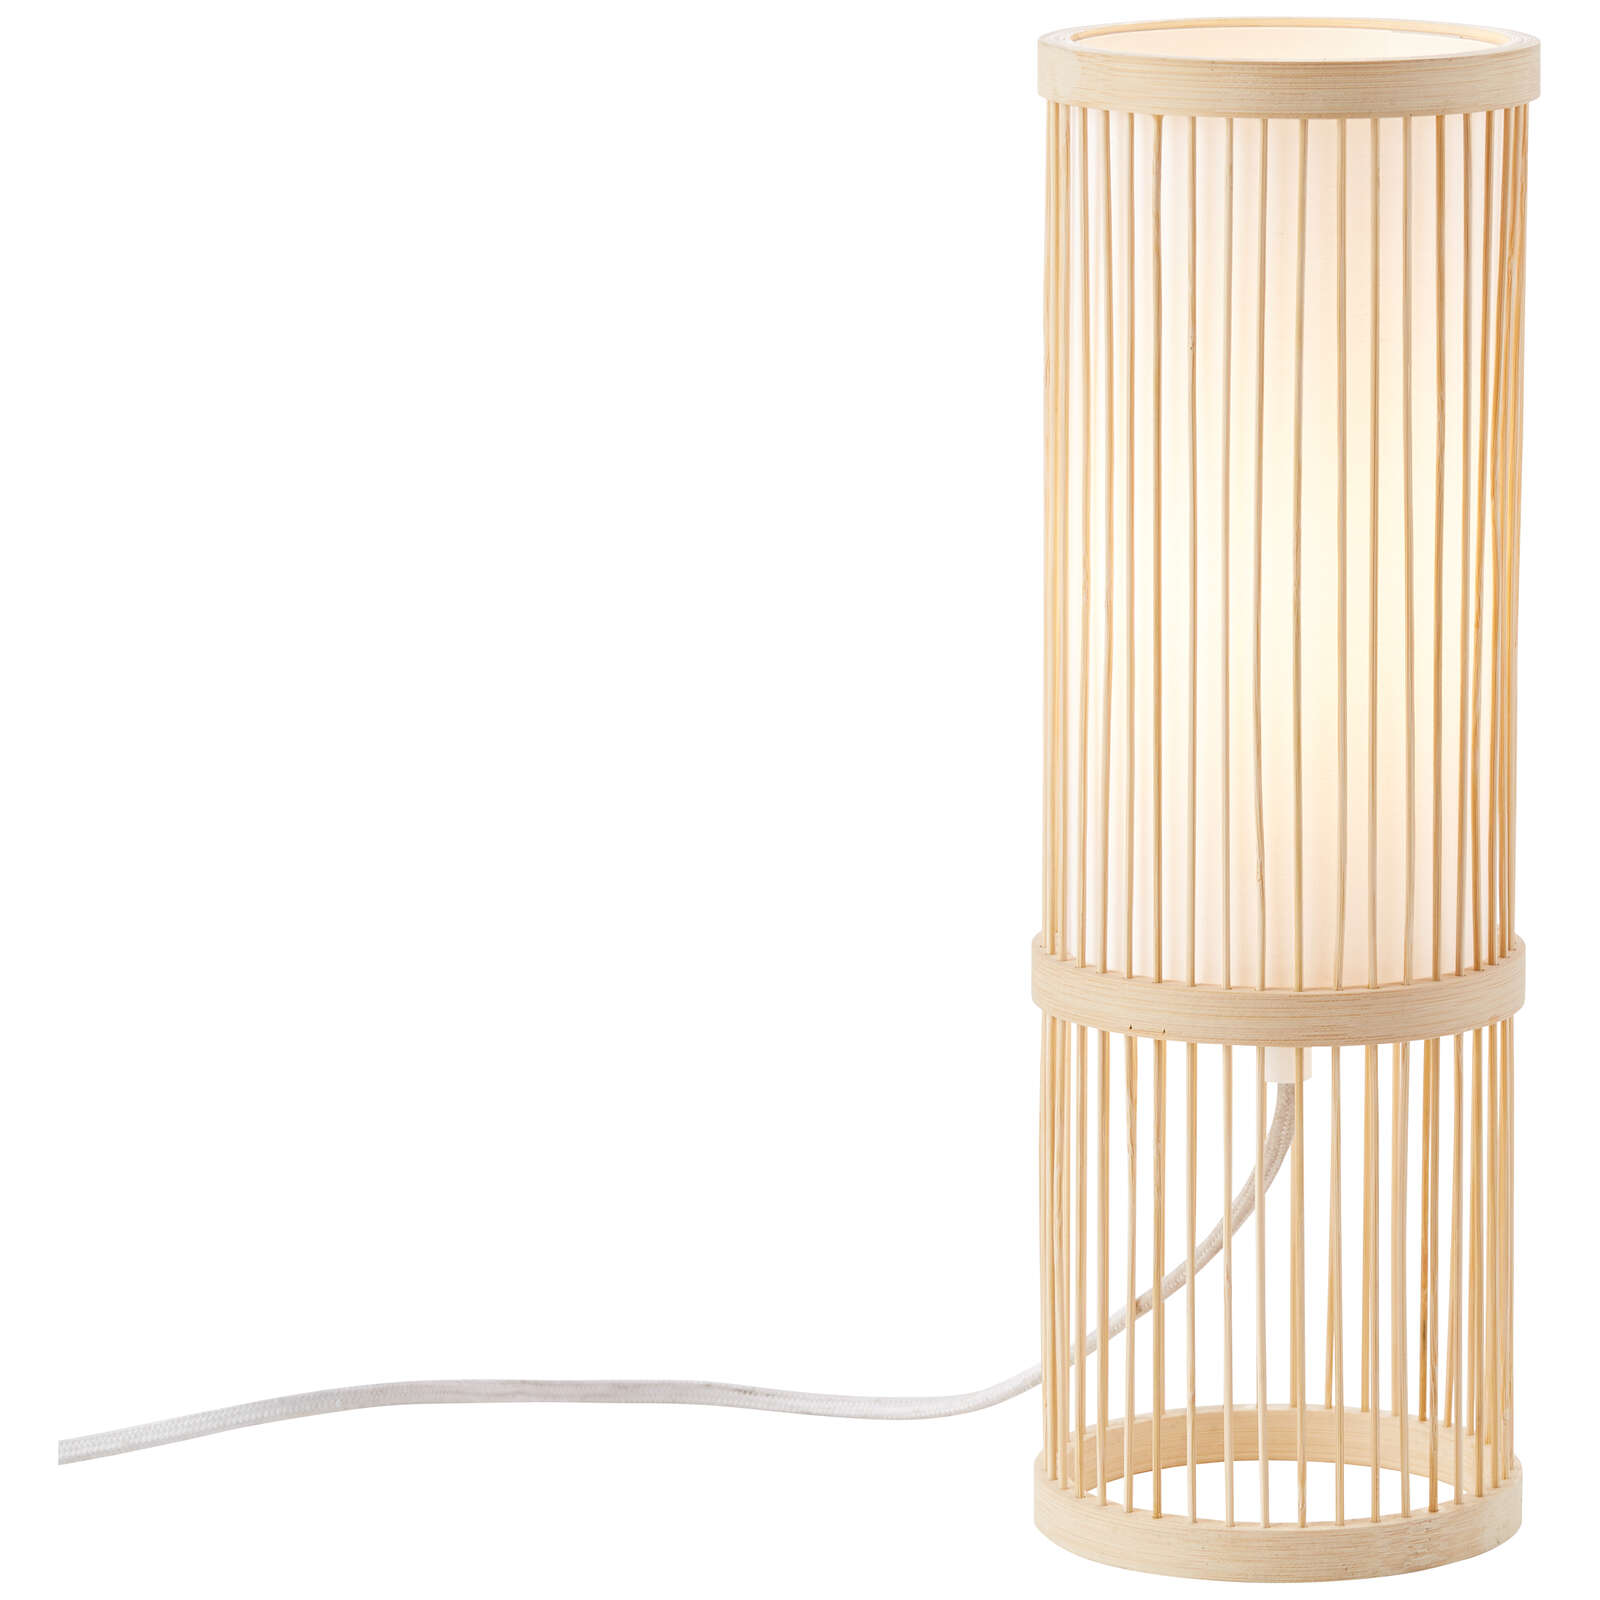             Bamboo table lamp - Luise 2 - Brown
        